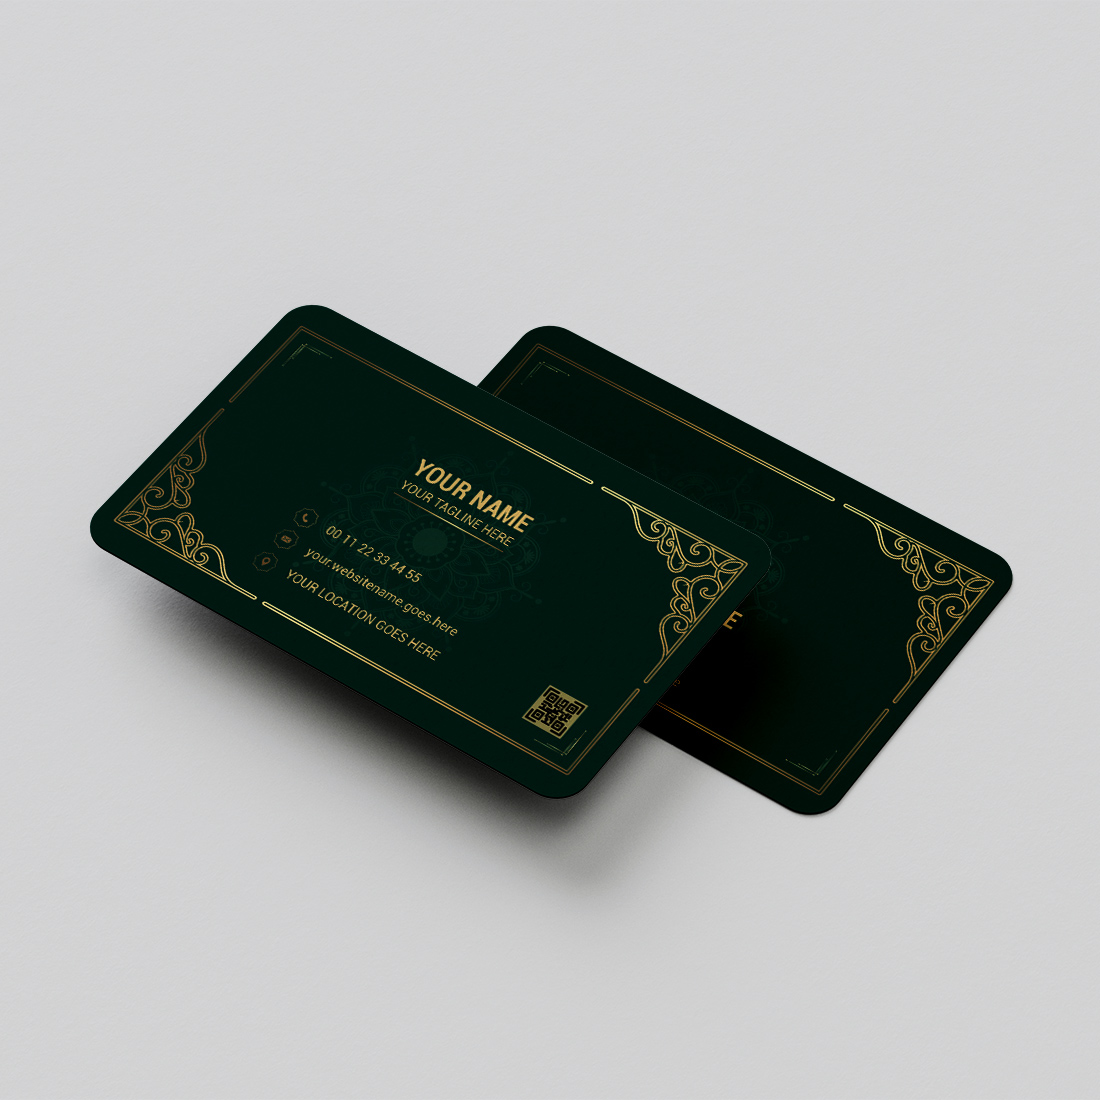 Pair of green business cards sitting on top of each other.